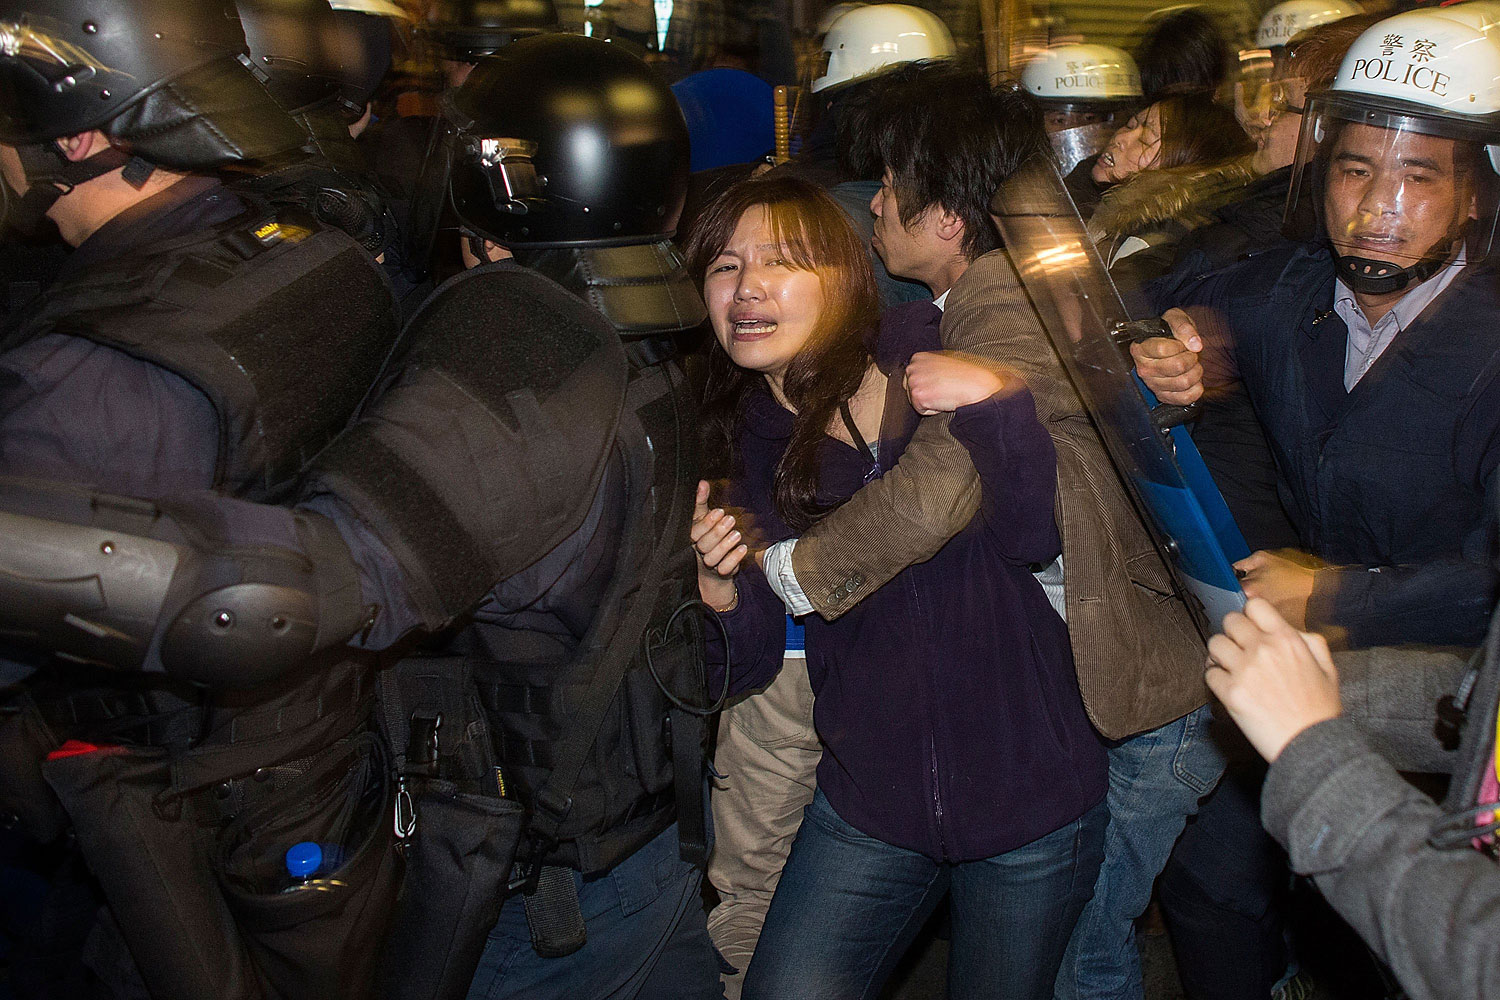 Riot police clash with student protesters outside the Executive Yuan, a branch of government in charge of administrative affairs for all of Taiwan on March 24, 2014 in Taipei, Taiwan.